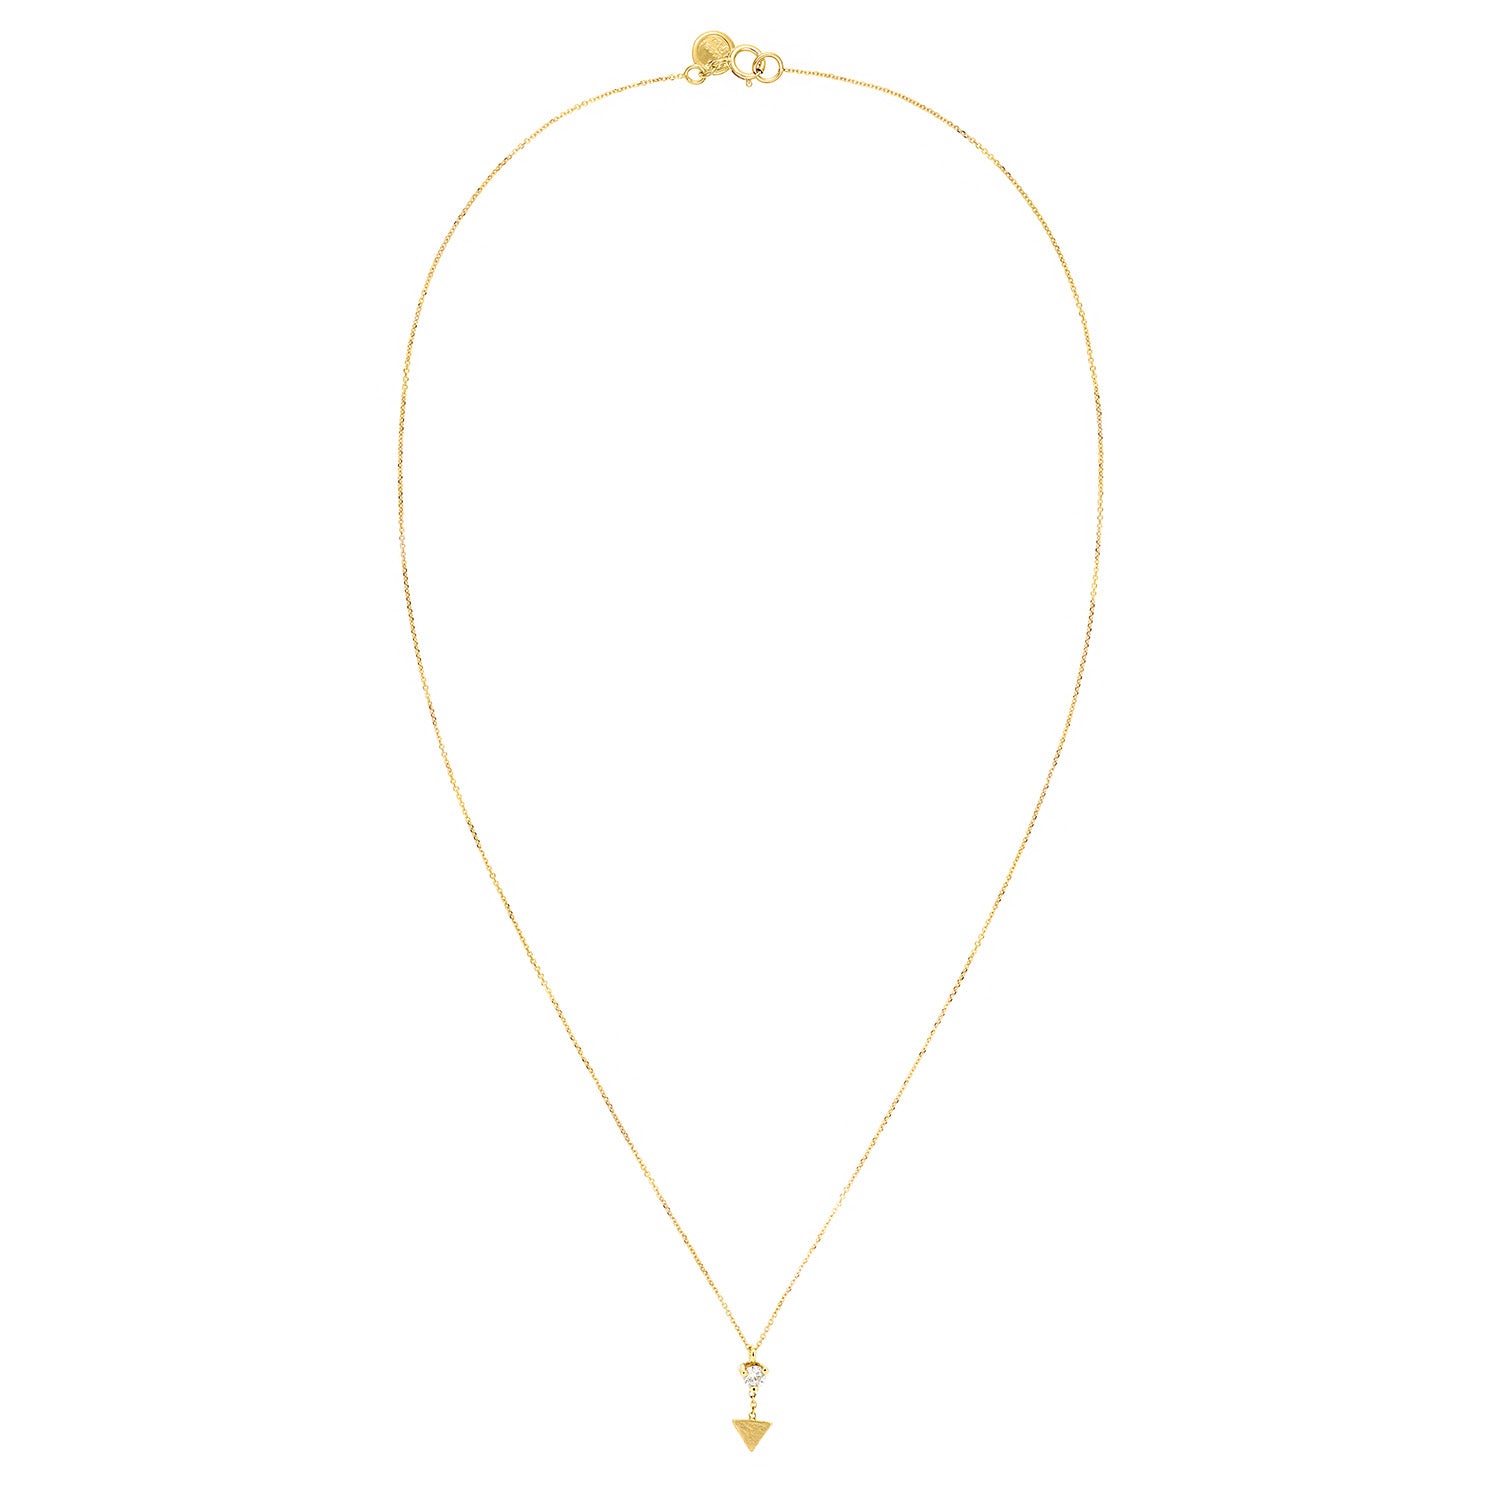 18ct yellow gold fine chain necklace with claw set white diamond and matt arrow pendant drop.